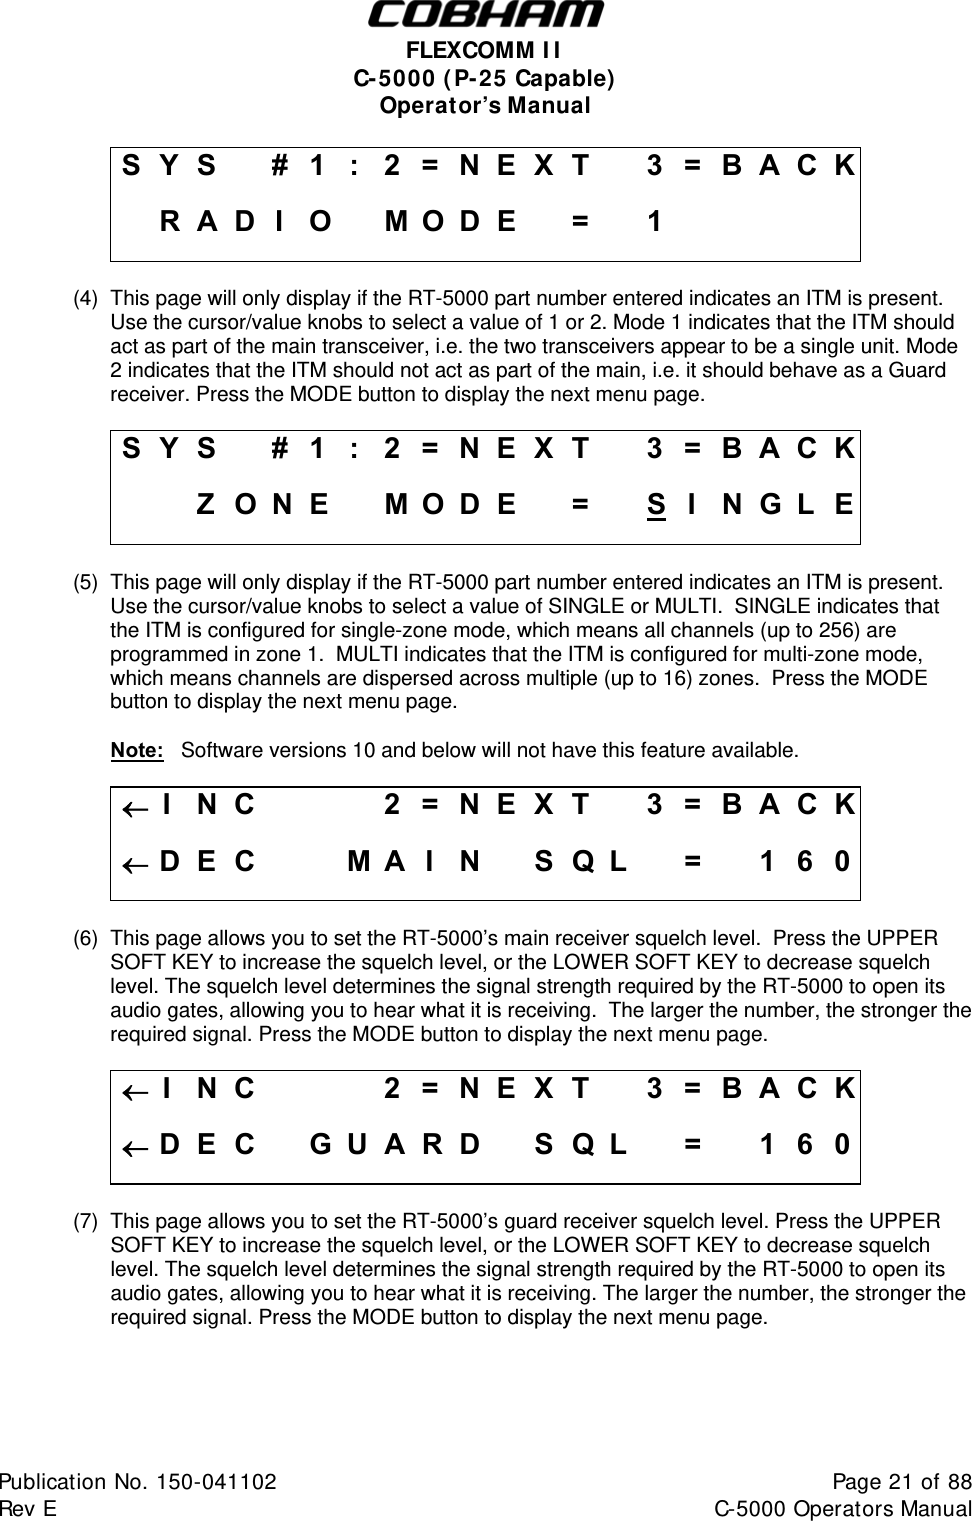  FLEXCOMM I I  C-5000 ( P-25 Capable)  Operator’s Manual S Y S    #  1  :  2 = N E X T   3 = B A C K  R A D I O  M O D E  =  1          (4)  This page will only display if the RT-5000 part number entered indicates an ITM is present. Use the cursor/value knobs to select a value of 1 or 2. Mode 1 indicates that the ITM should act as part of the main transceiver, i.e. the two transceivers appear to be a single unit. Mode 2 indicates that the ITM should not act as part of the main, i.e. it should behave as a Guard receiver. Press the MODE button to display the next menu page.  S Y S    #  1  :  2 = N E X T   3 = B A C K    Z O N E  MODE  =  SIN G L E (5)  This page will only display if the RT-5000 part number entered indicates an ITM is present. Use the cursor/value knobs to select a value of SINGLE or MULTI.  SINGLE indicates that the ITM is configured for single-zone mode, which means all channels (up to 256) are programmed in zone 1.  MULTI indicates that the ITM is configured for multi-zone mode, which means channels are dispersed across multiple (up to 16) zones.  Press the MODE button to display the next menu page.  Note:   Software versions 10 and below will not have this feature available.  I  N C        2 = N E X T   3 = B A C K D E C    M A I N  S Q L  =  1 6 0 (6)  This page allows you to set the RT-5000’s main receiver squelch level.  Press the UPPER SOFT KEY to increase the squelch level, or the LOWER SOFT KEY to decrease squelch level. The squelch level determines the signal strength required by the RT-5000 to open its audio gates, allowing you to hear what it is receiving.  The larger the number, the stronger the required signal. Press the MODE button to display the next menu page.  I  N C        2 = N E X T   3 = B A C K D E C  G UARD  SQL  =  1 6 0 (7)  This page allows you to set the RT-5000’s guard receiver squelch level. Press the UPPER SOFT KEY to increase the squelch level, or the LOWER SOFT KEY to decrease squelch level. The squelch level determines the signal strength required by the RT-5000 to open its audio gates, allowing you to hear what it is receiving. The larger the number, the stronger the required signal. Press the MODE button to display the next menu page.  Publication No. 150-041102  Page 21 of 88  Rev E  C-5000 Operators Manual    